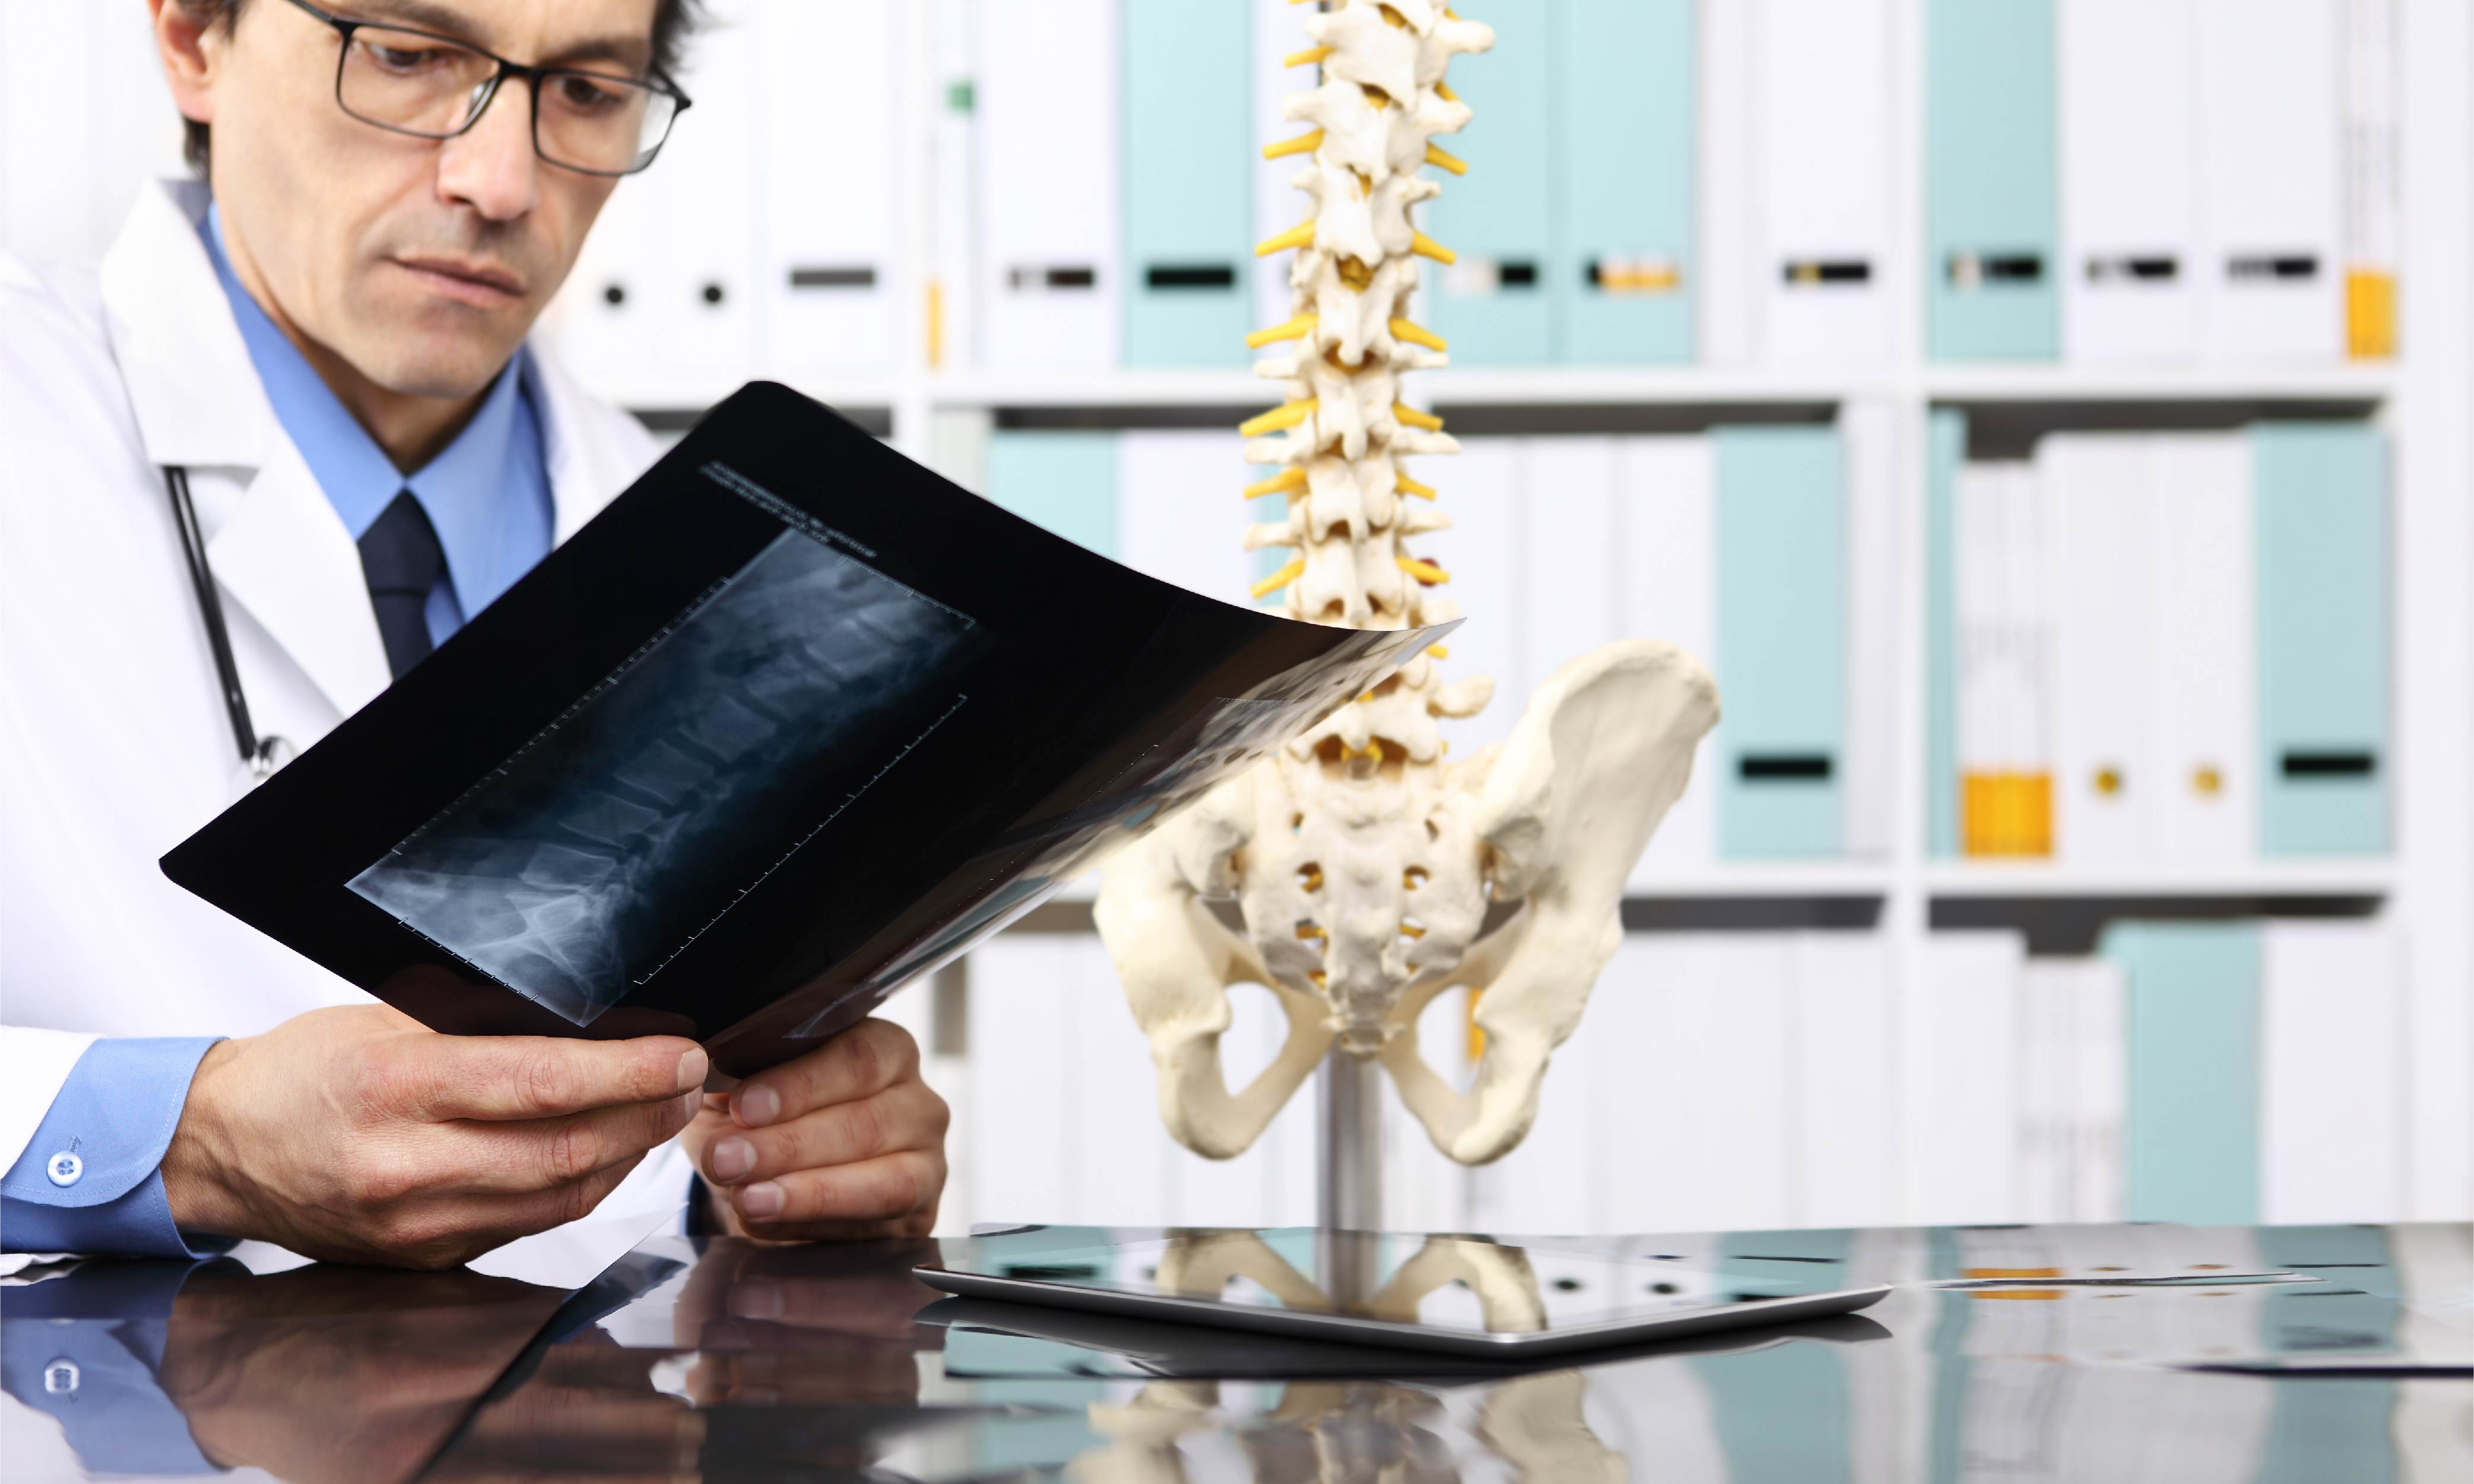 Slipped Disc? Surgery Is NOT The Answer For 90% Of People, Says New Study